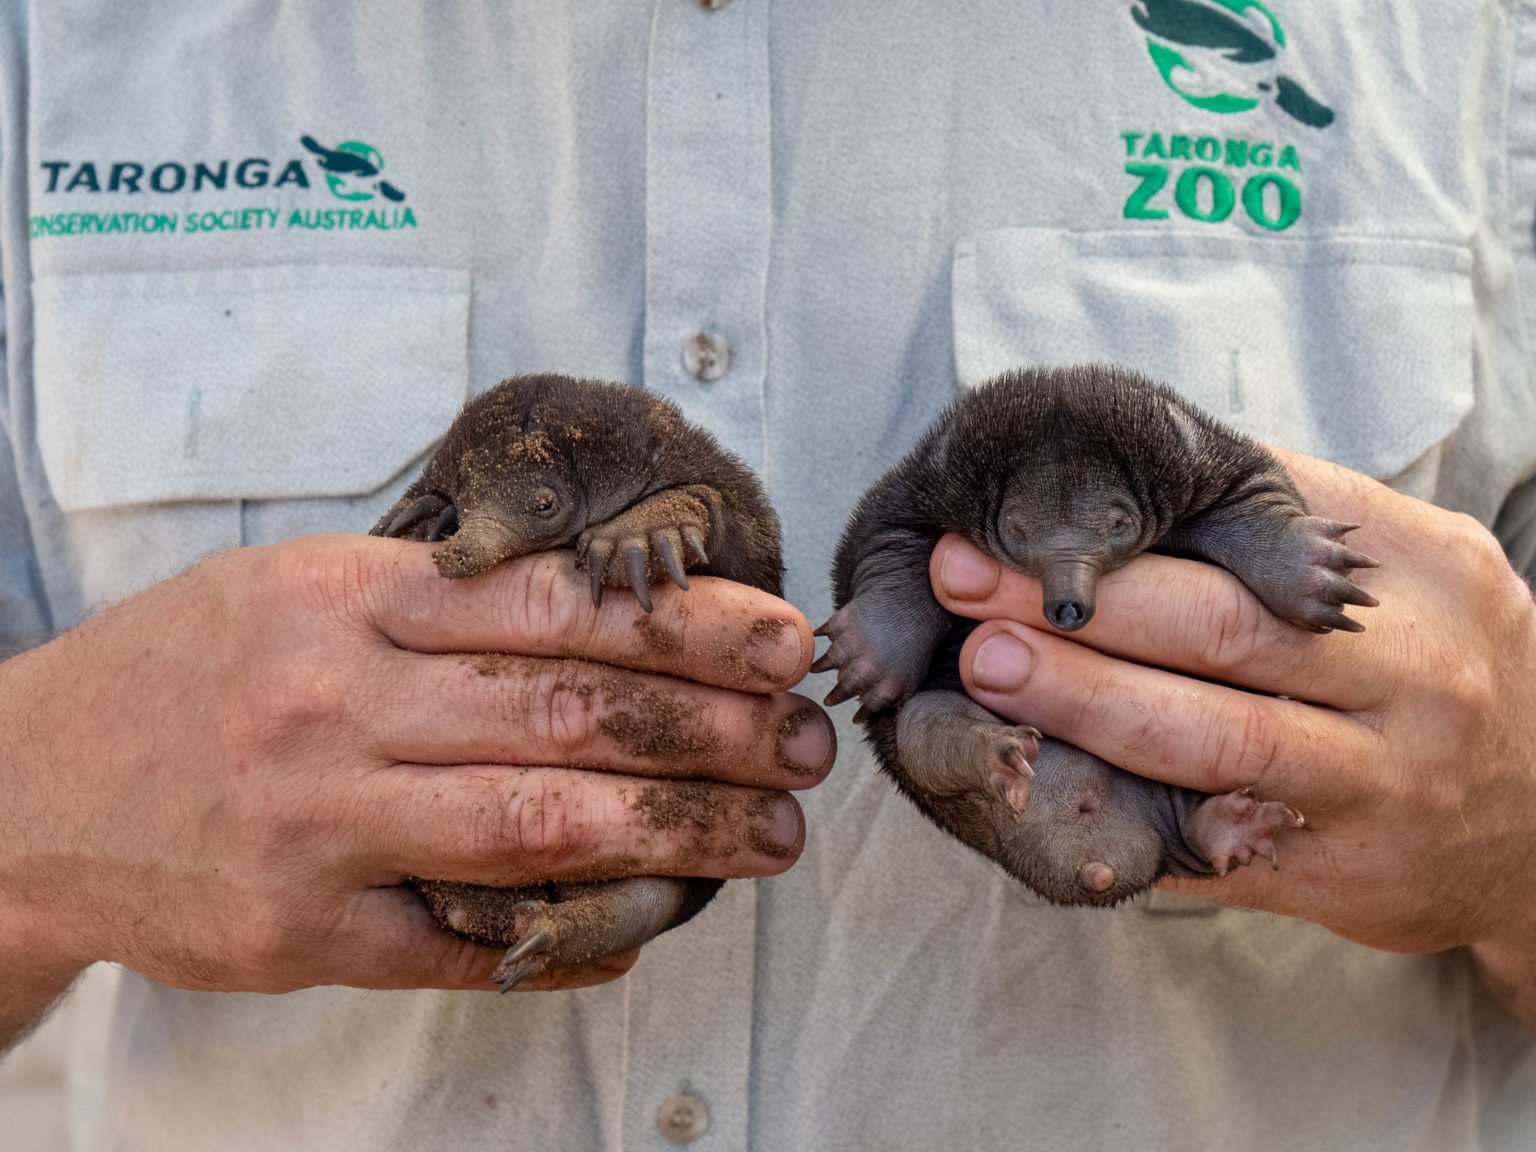 platypus babies are called